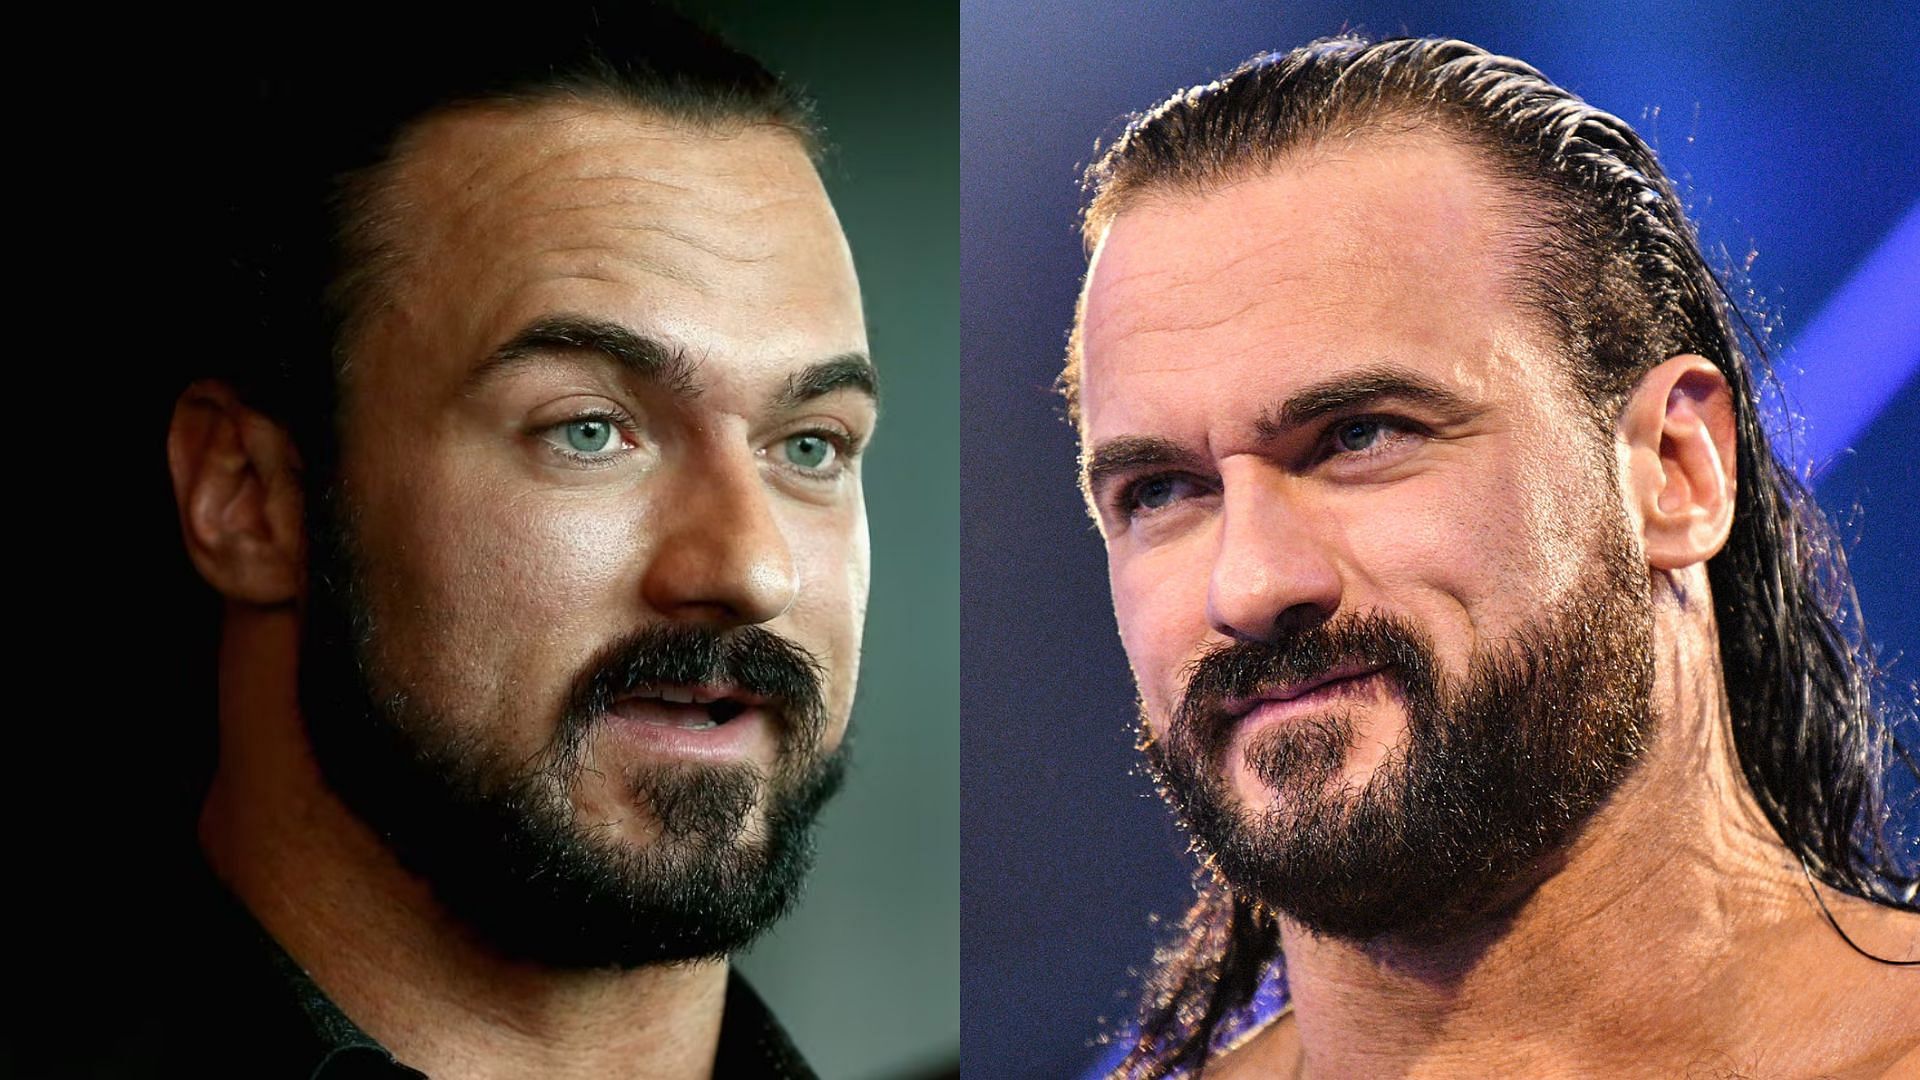 Drew McIntyre returned at Money in the Bank 2023 in London.